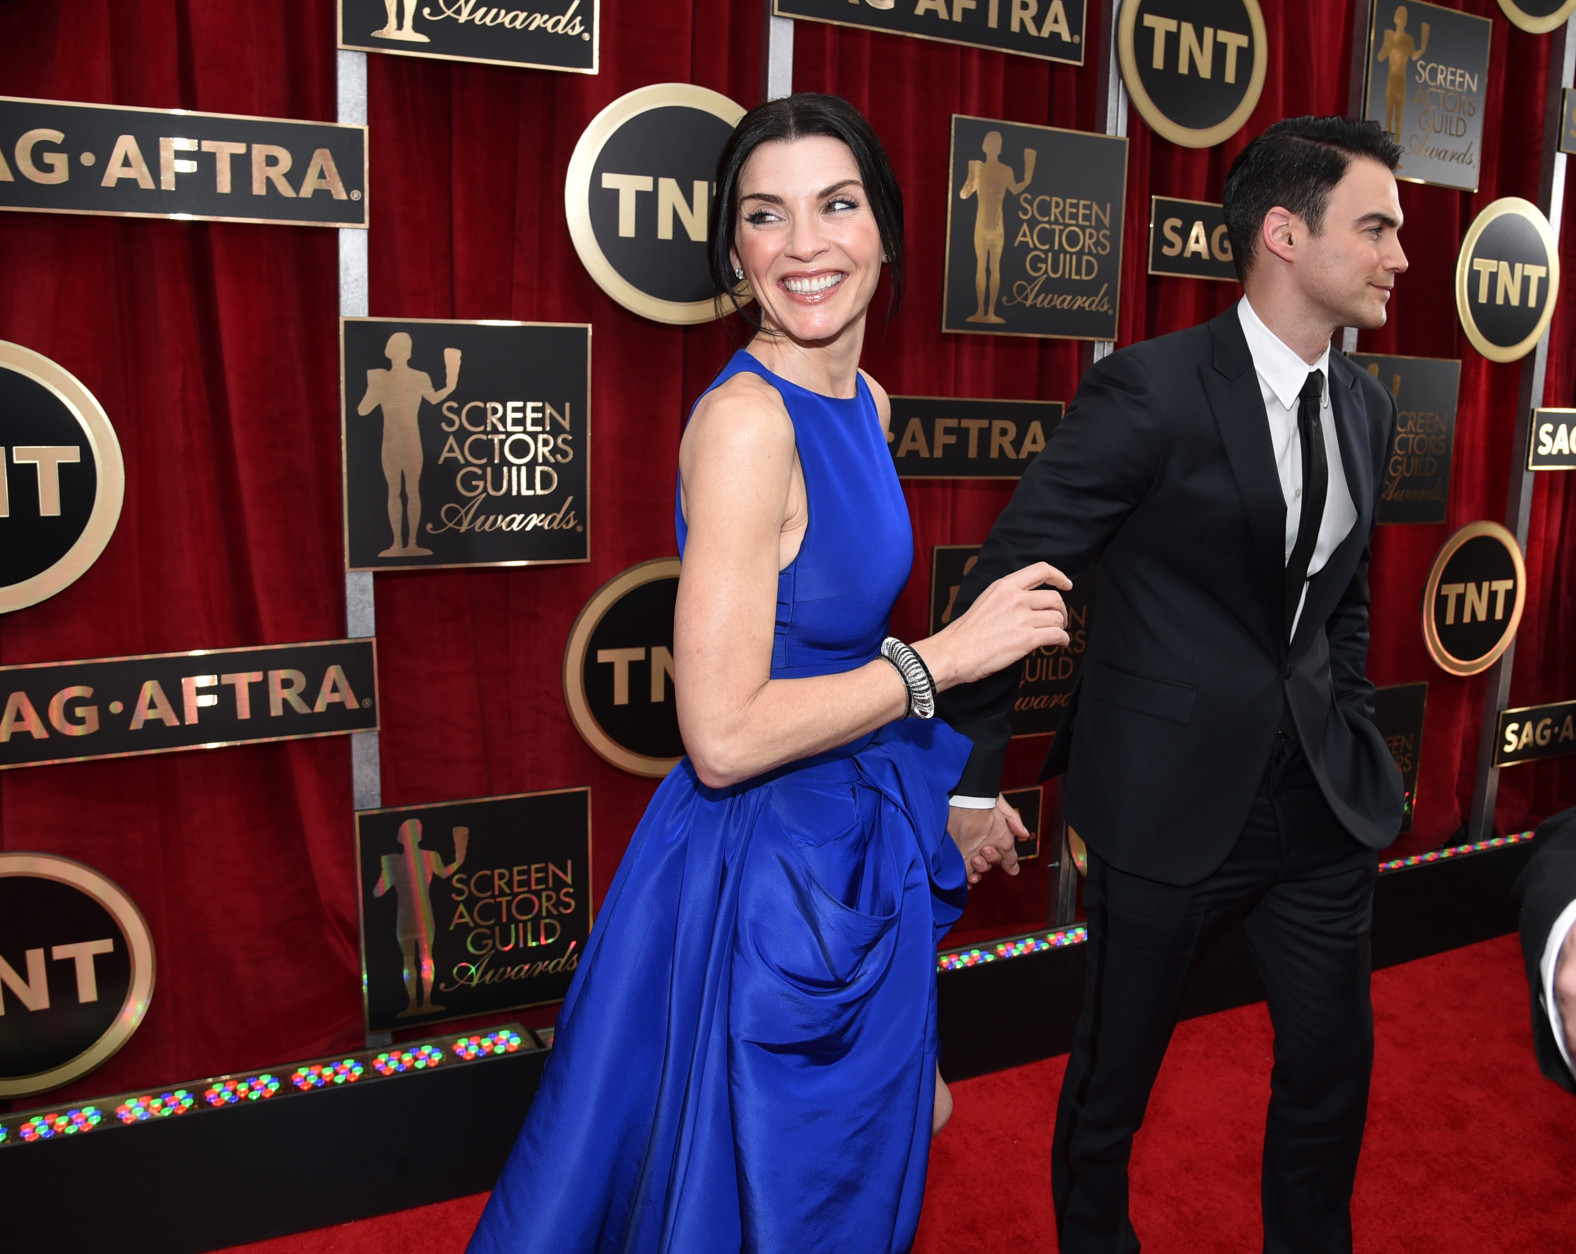 Julianna Margulies, left, and Keith Lieberthal arrive at the 21st annual Screen Actors Guild Awards at the Shrine Auditorium on Sunday, Jan. 25, 2015, in Los Angeles. (Photo by John Shearer/Invision/AP)